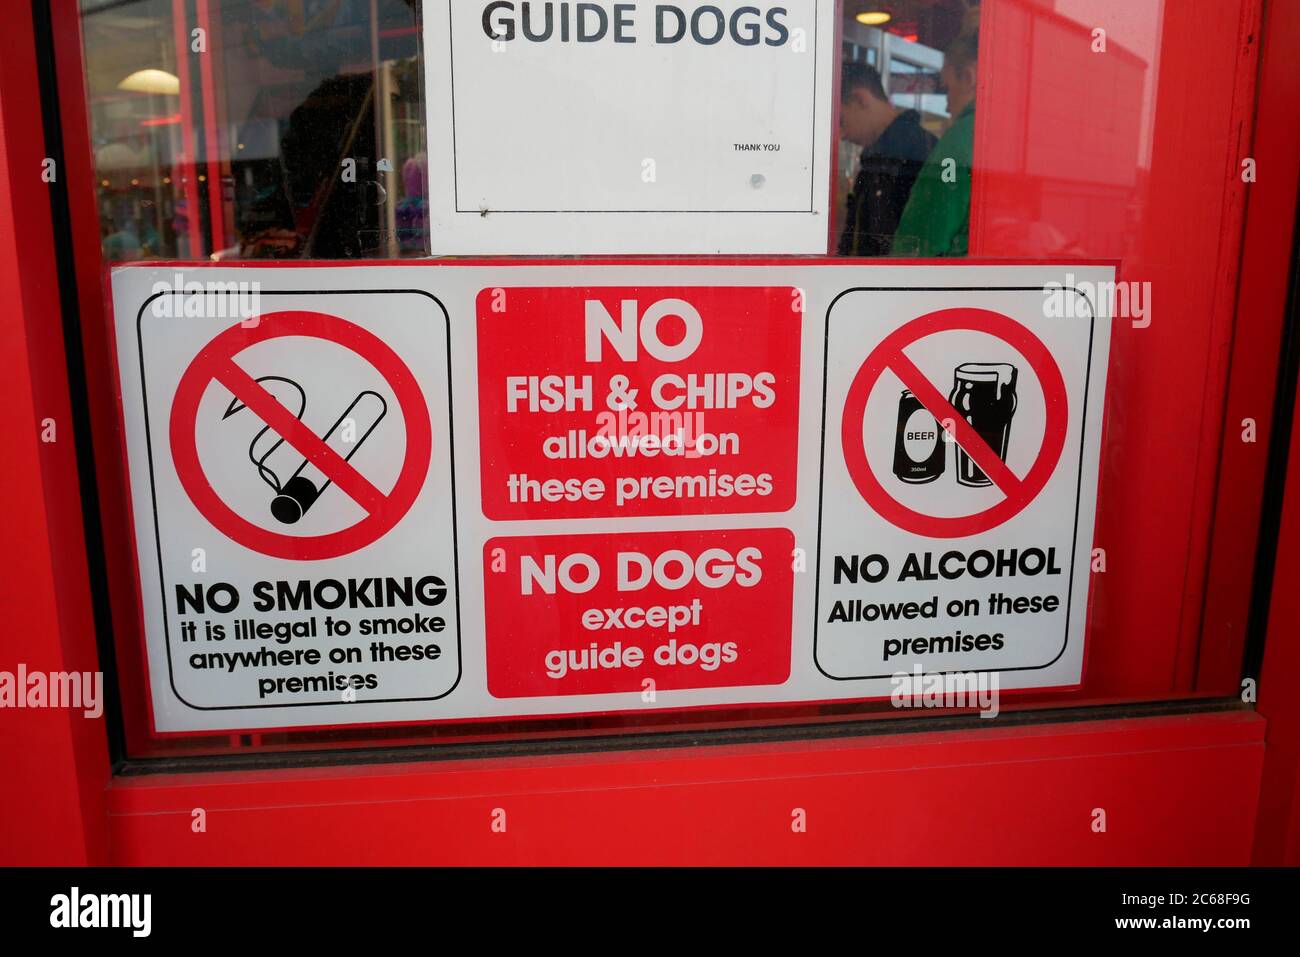 Sign saying NO to the usual things,but with the singular addition of fish & chips, no smoking, no alcohol, no dogs, food allowed, but not fish-n-chips Stock Photo